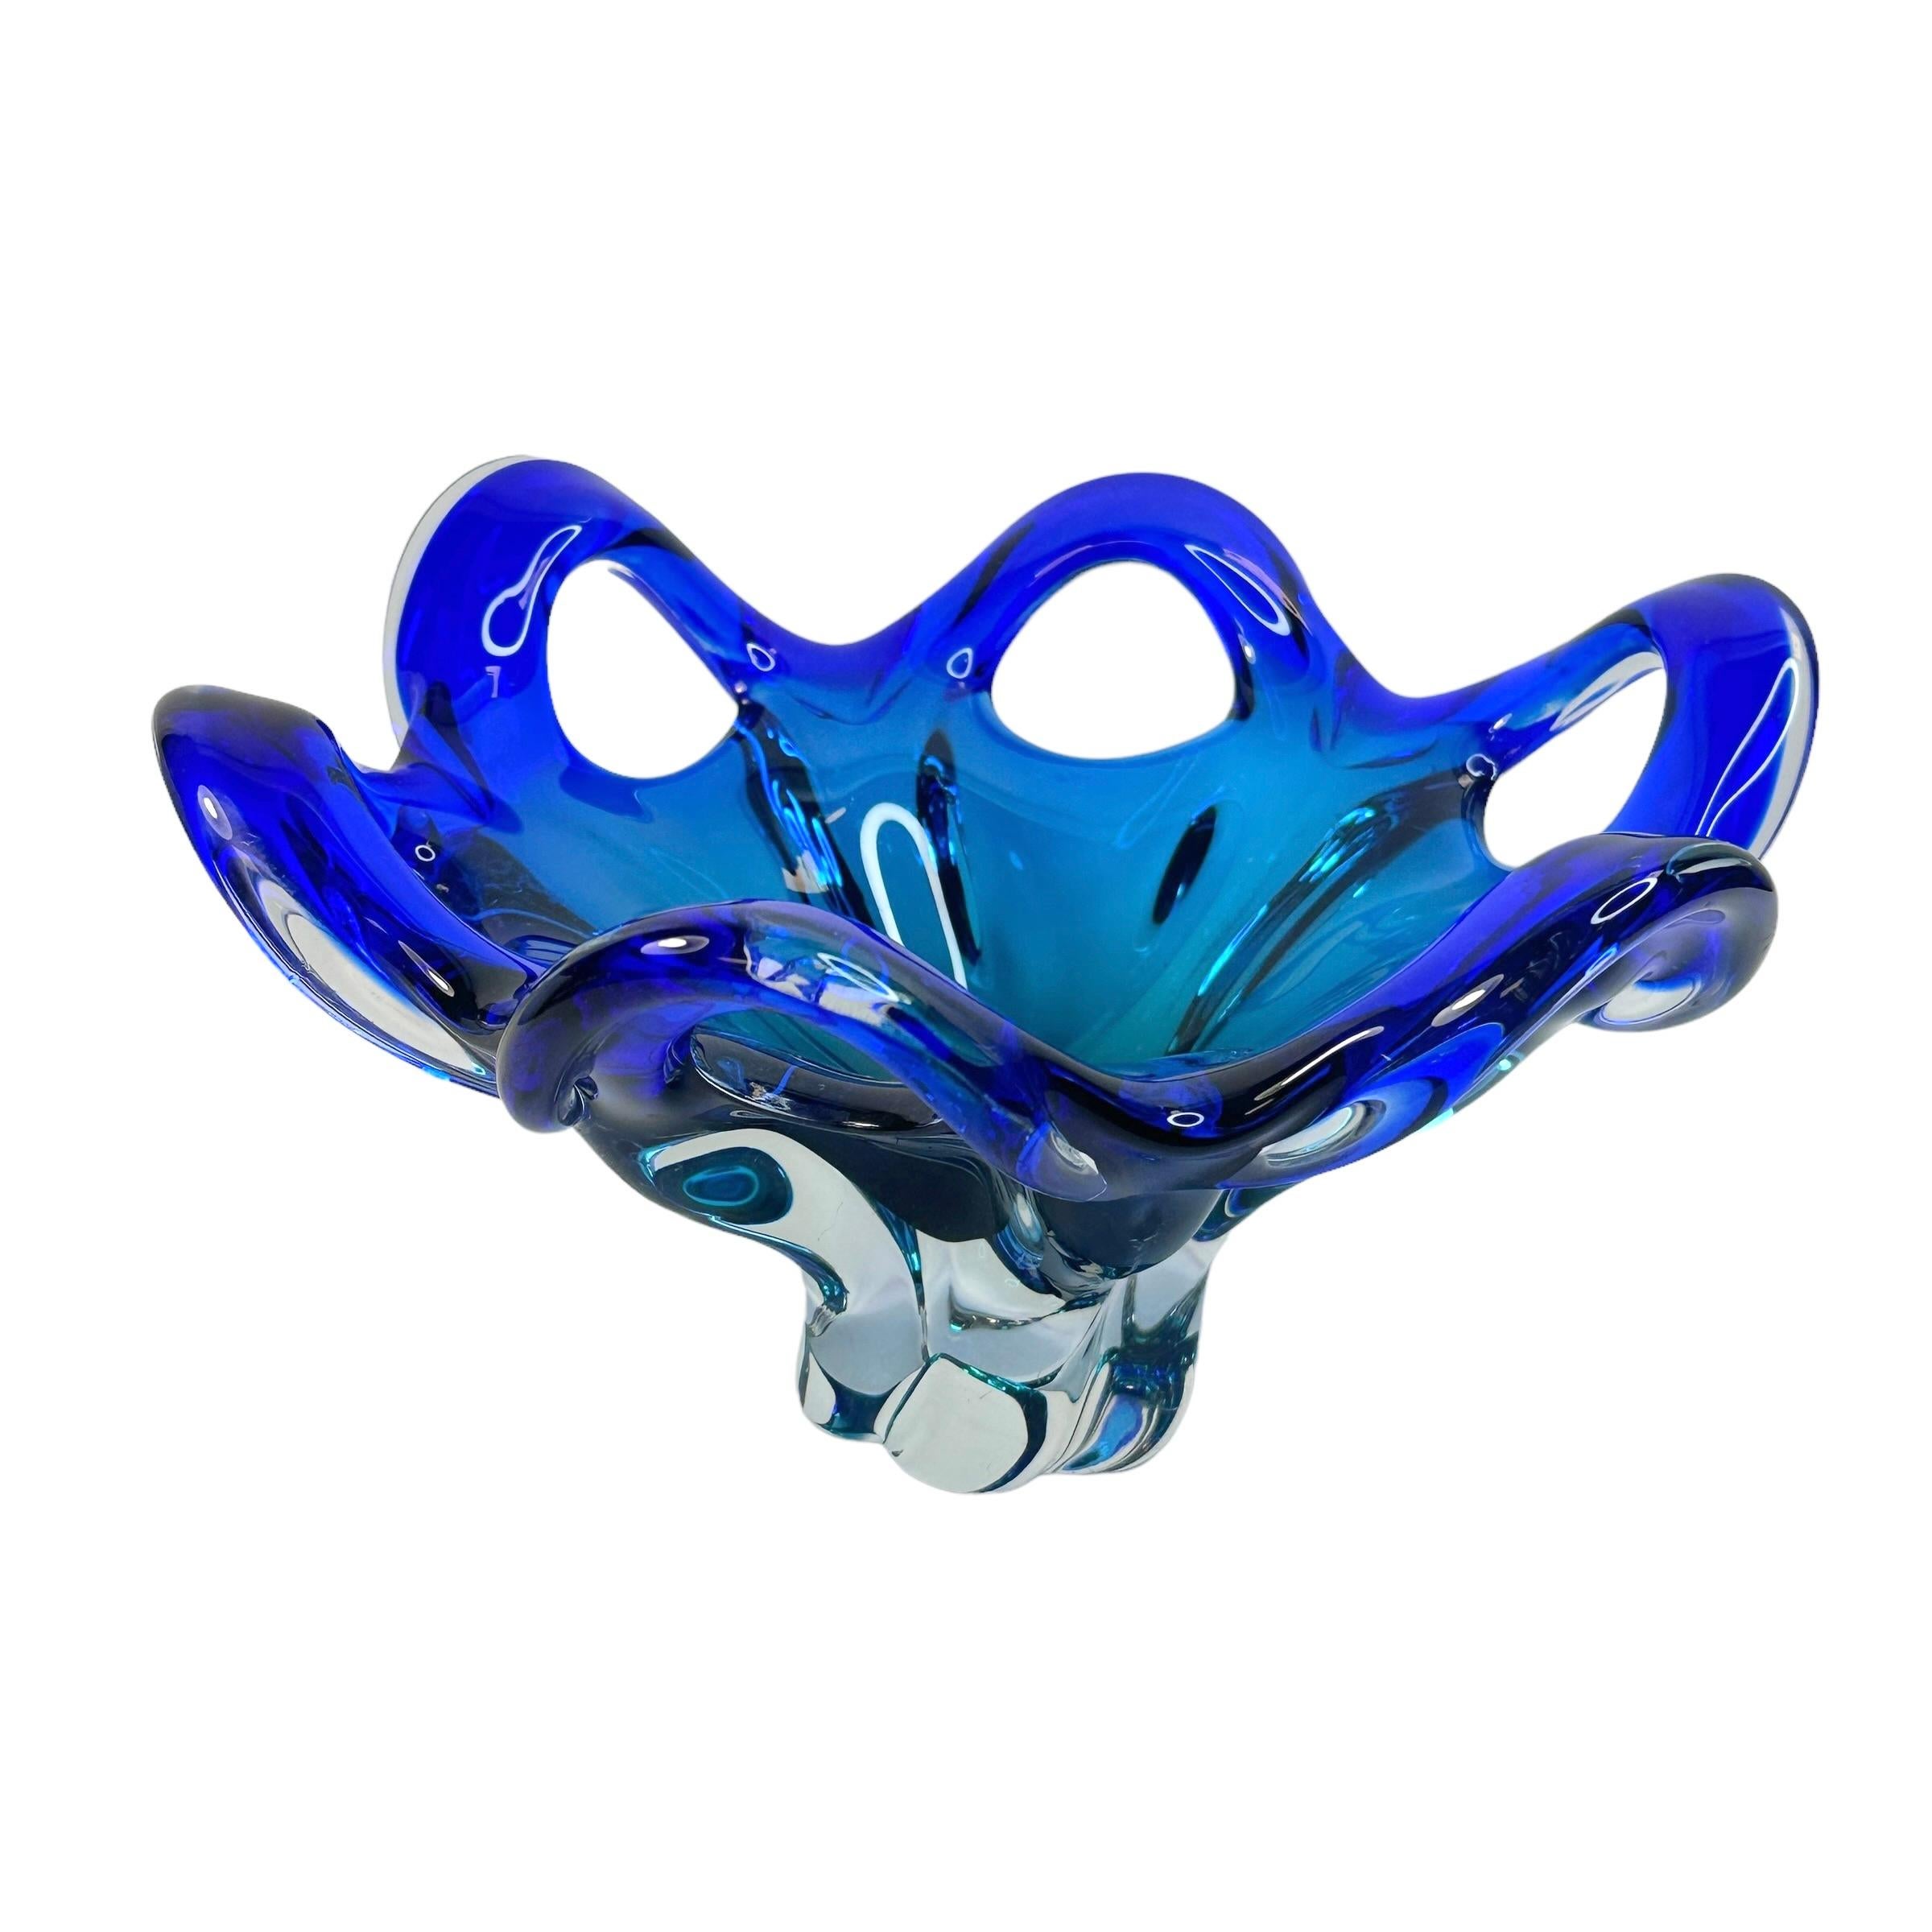 Gorgeous hand blown Murano art glass piece with Sommerso and bullicante techniques. A beautiful organic shaped bowl, catchall, Venice, Murano, Italy, 1970s.
Found at an Estate sale in Bologna, Italy. Nice addition to any room.